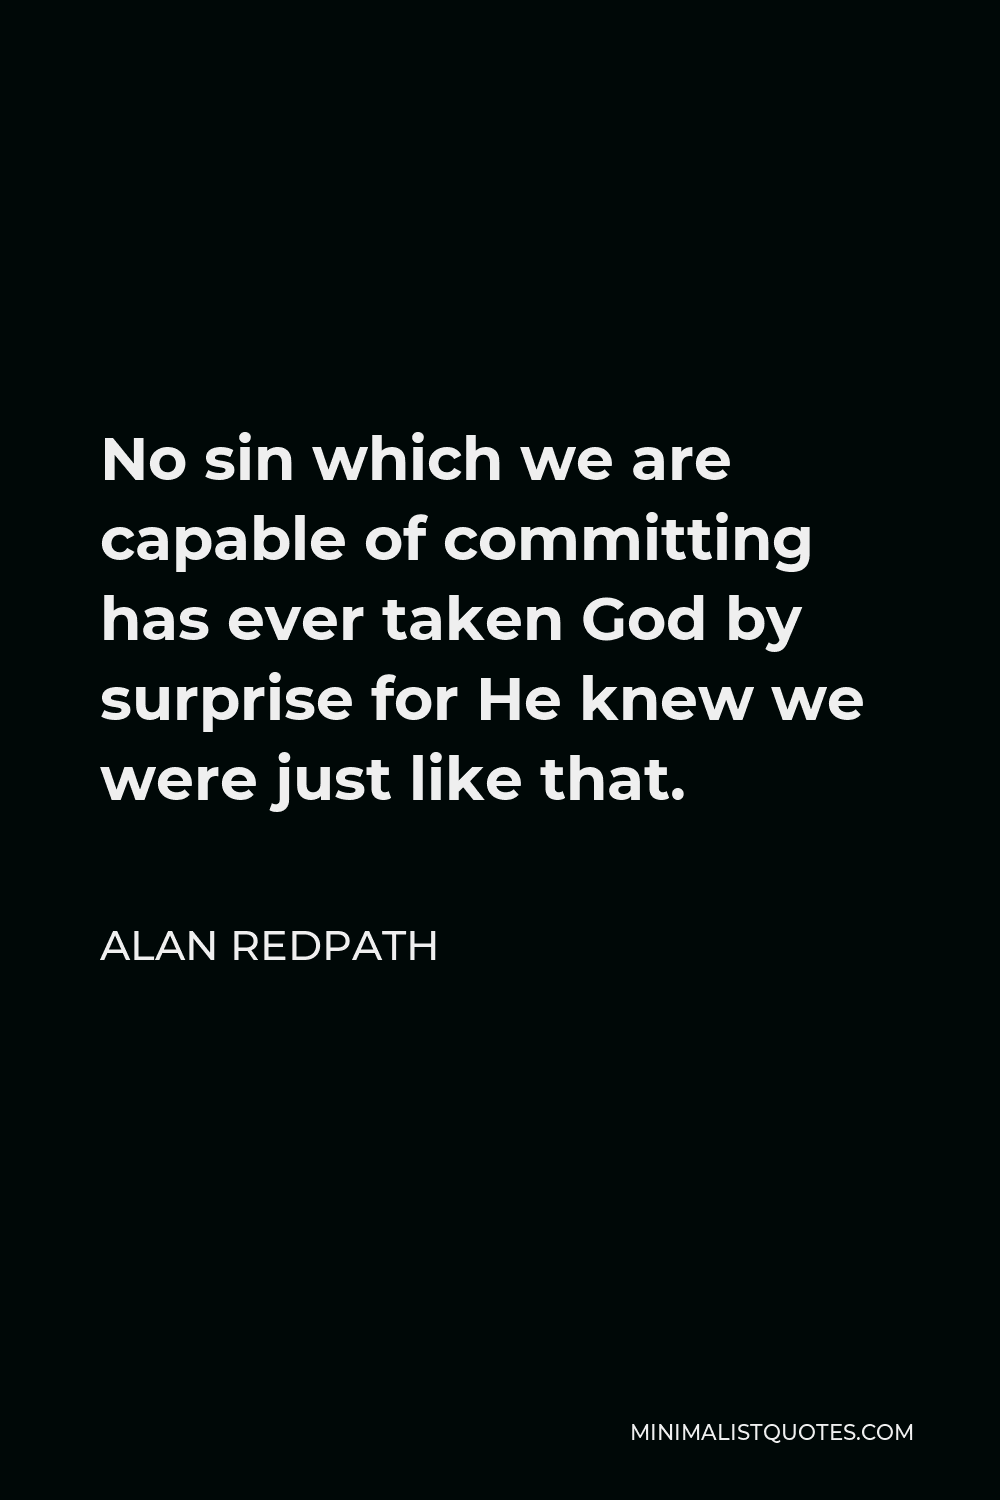 Alan Redpath Quote - No sin which we are capable of committing has ever taken God by surprise for He knew we were just like that.